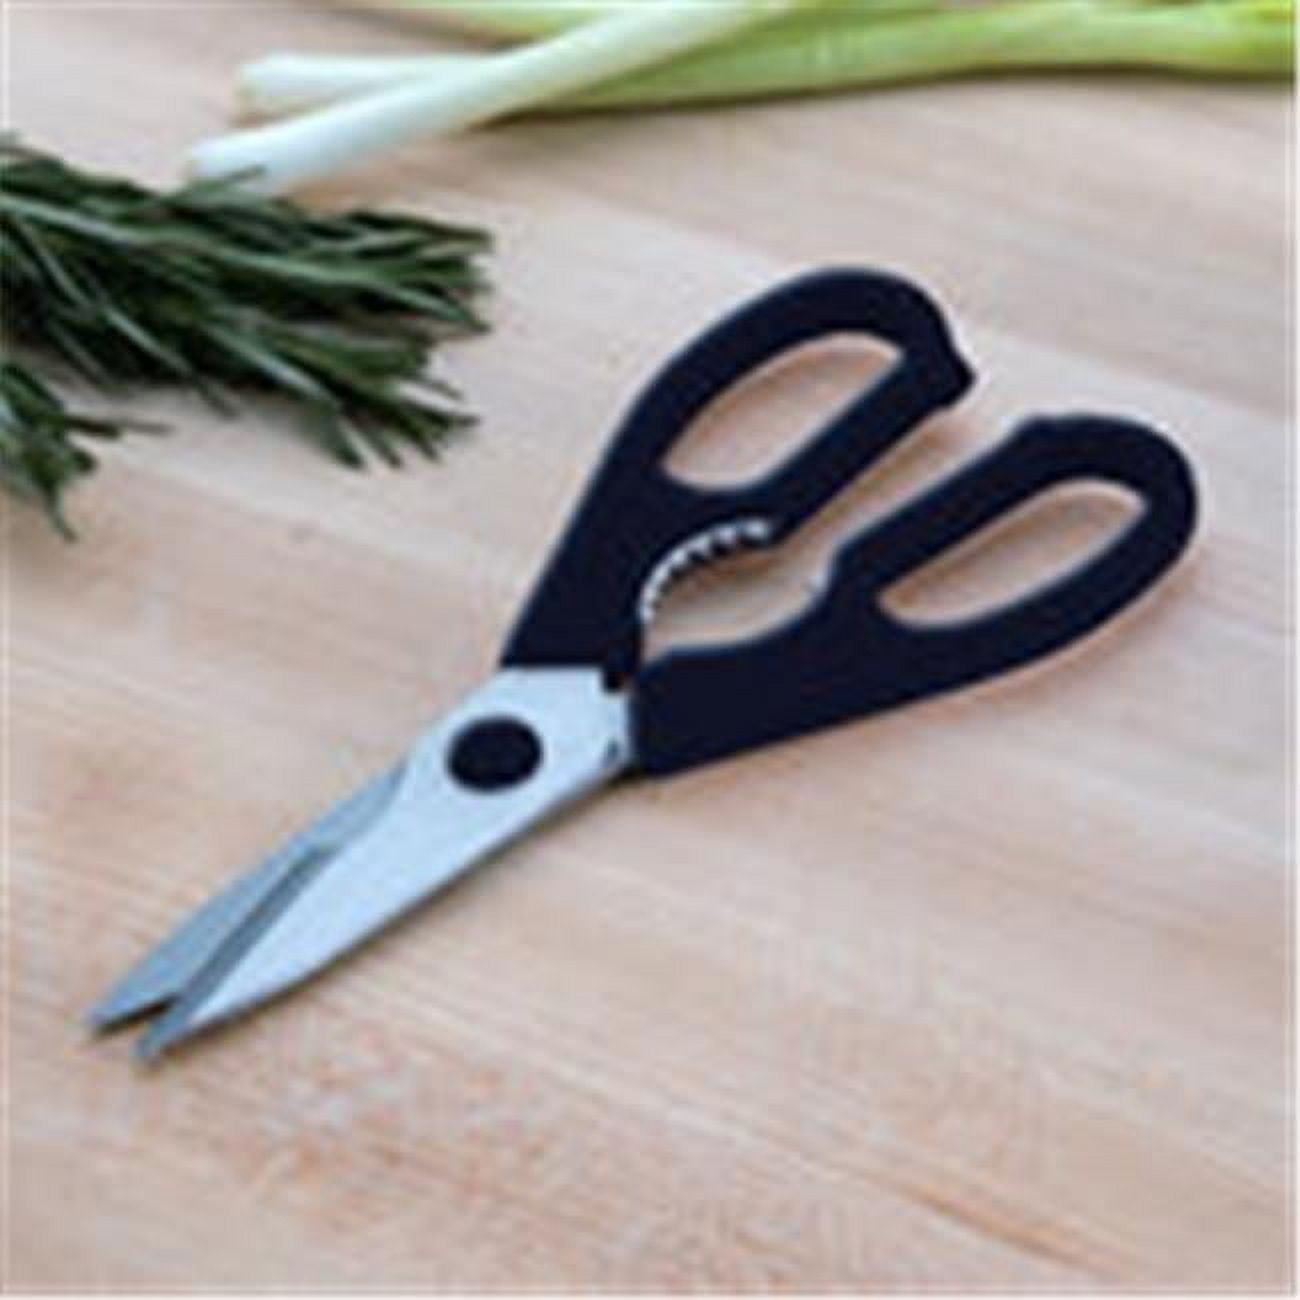 MIU Come-Apart Kitchen Shears - 3 Pack – Cutlery and More